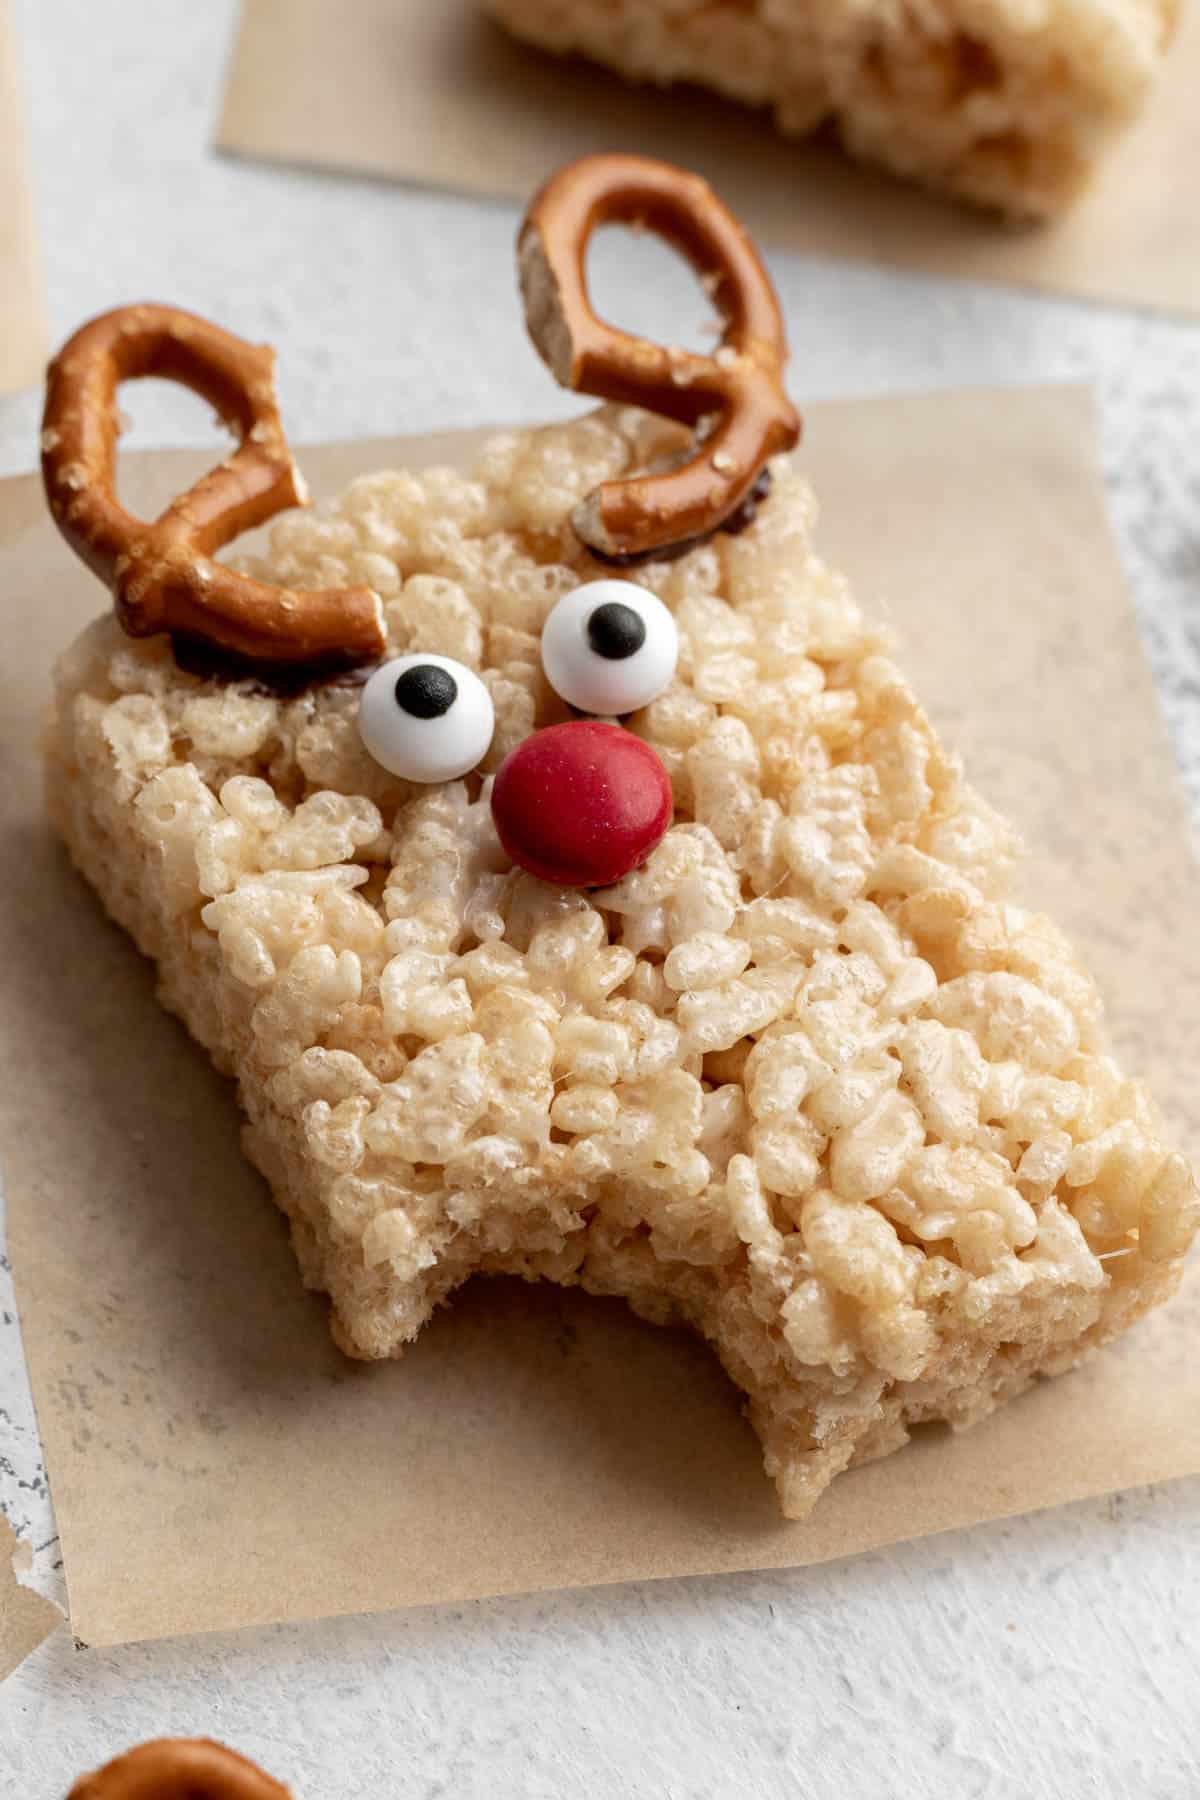 A reindeer rice krispie treat with a bite taken out of it.